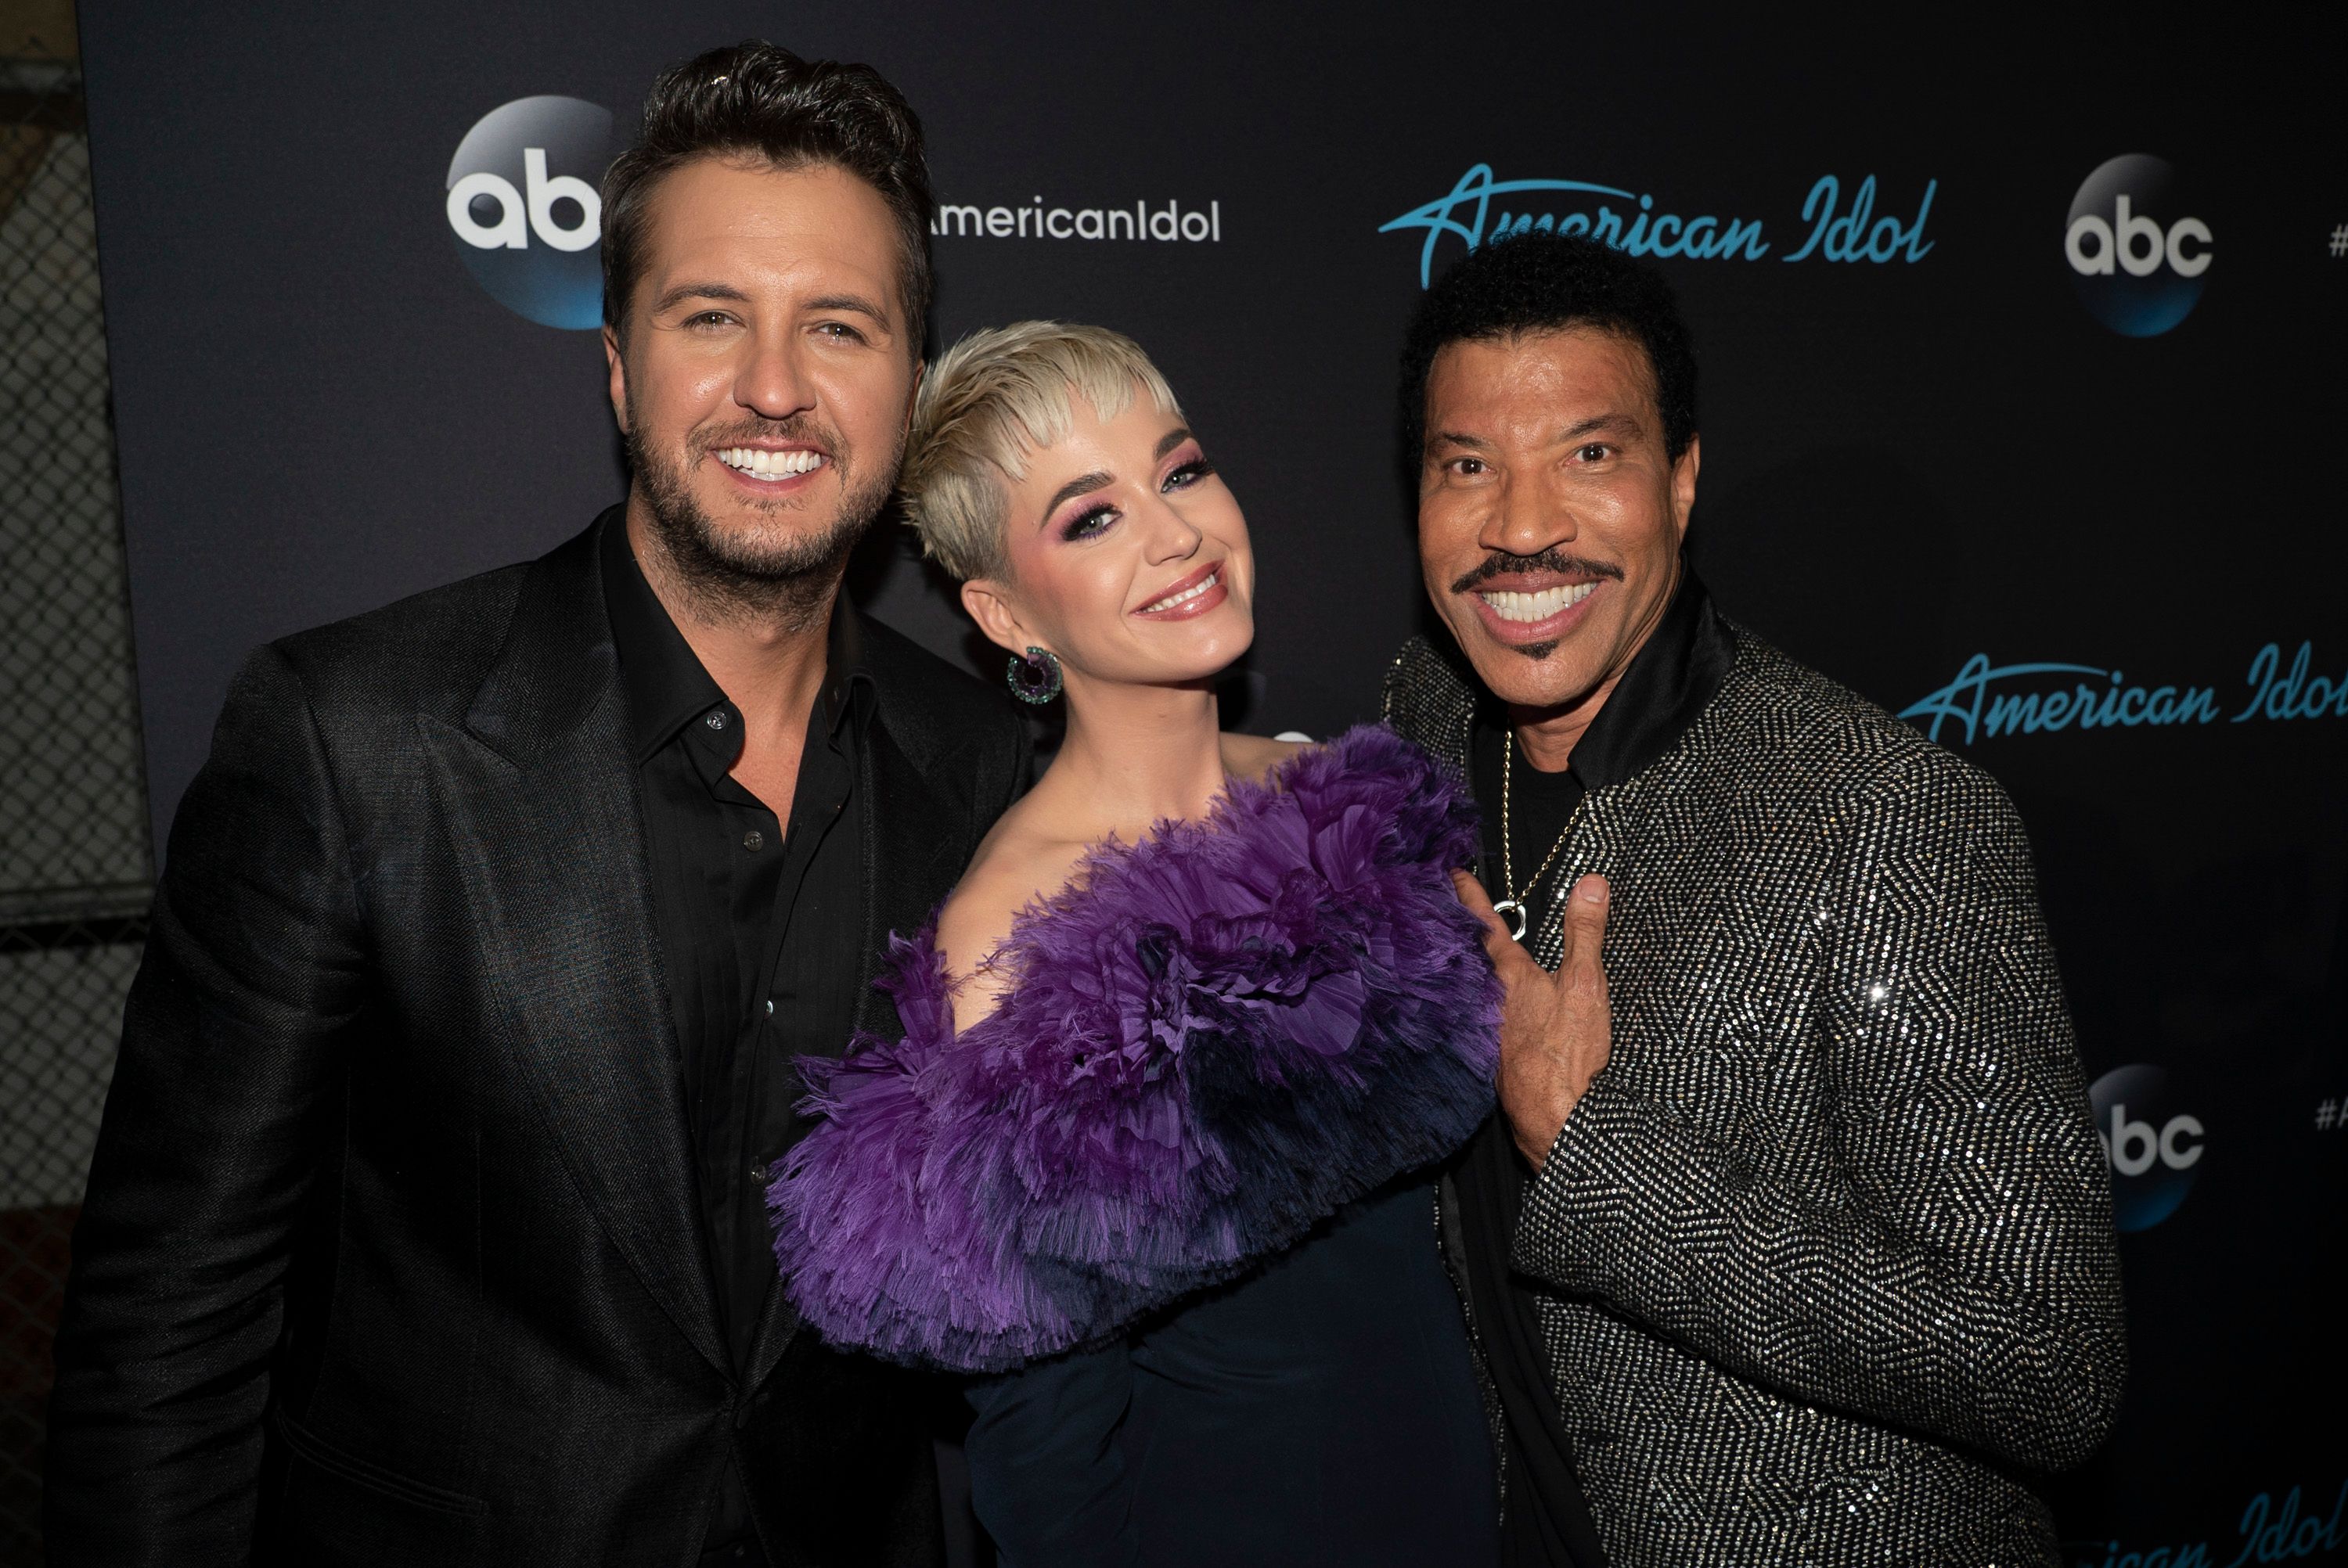 Luke Bryan, Katy Perry, and Lionel Richie on the set of "American Idol" on May 21, 2018. | Photo: Getty Images